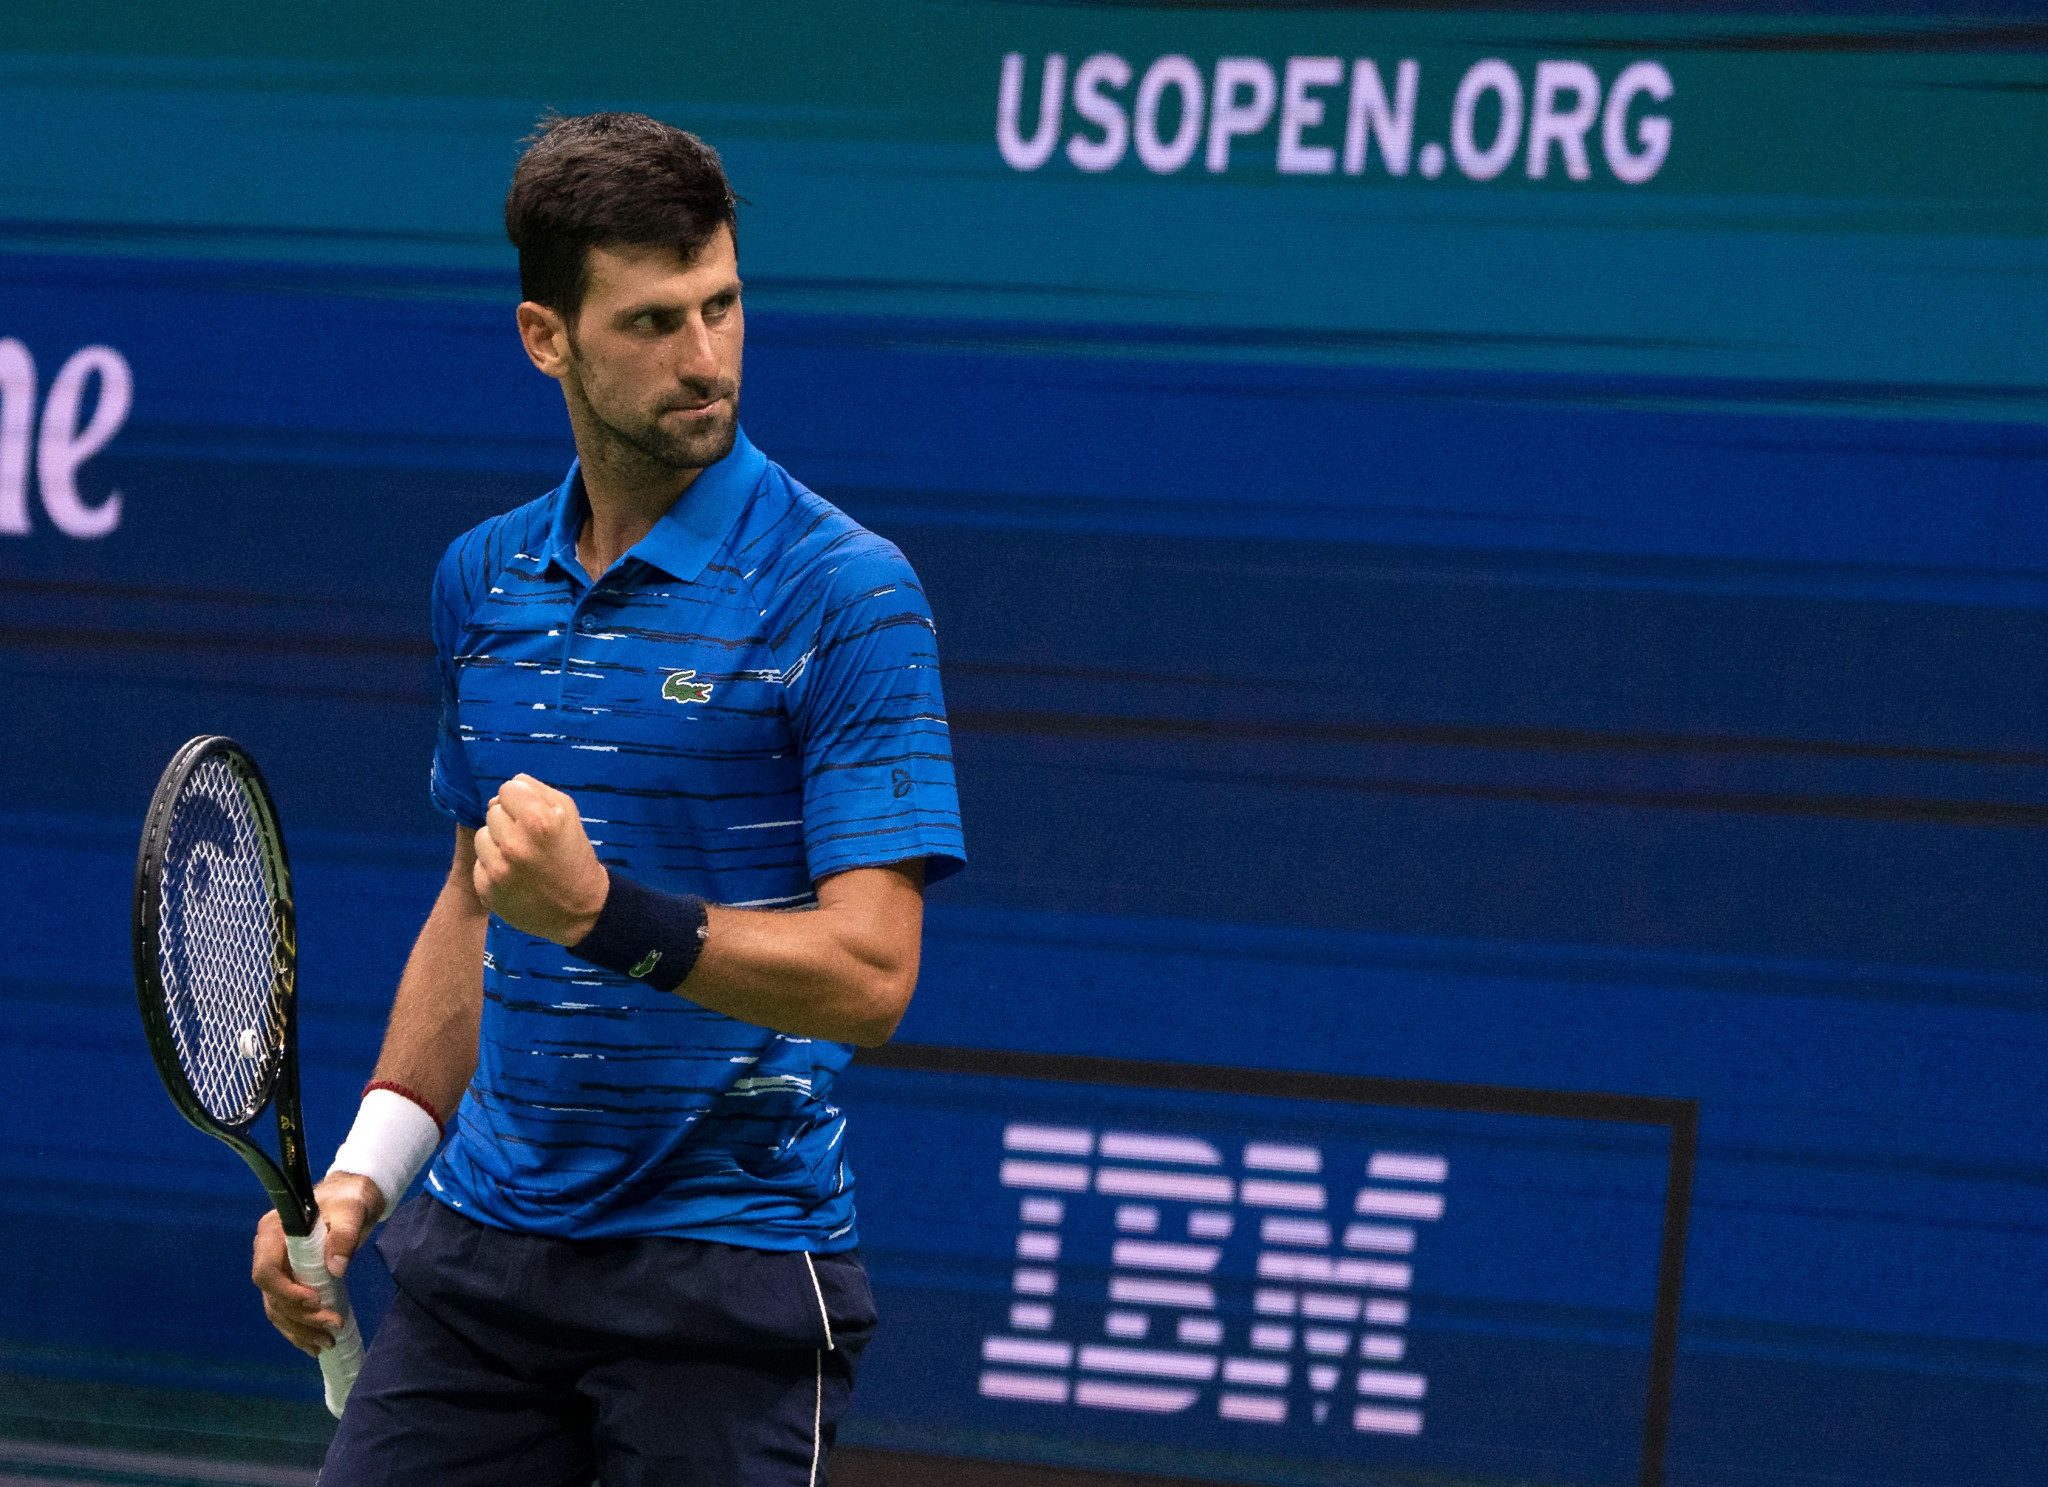 Novak Djokovic is set to compete at this year's US Open, a competition he has won three times ©Getty Images